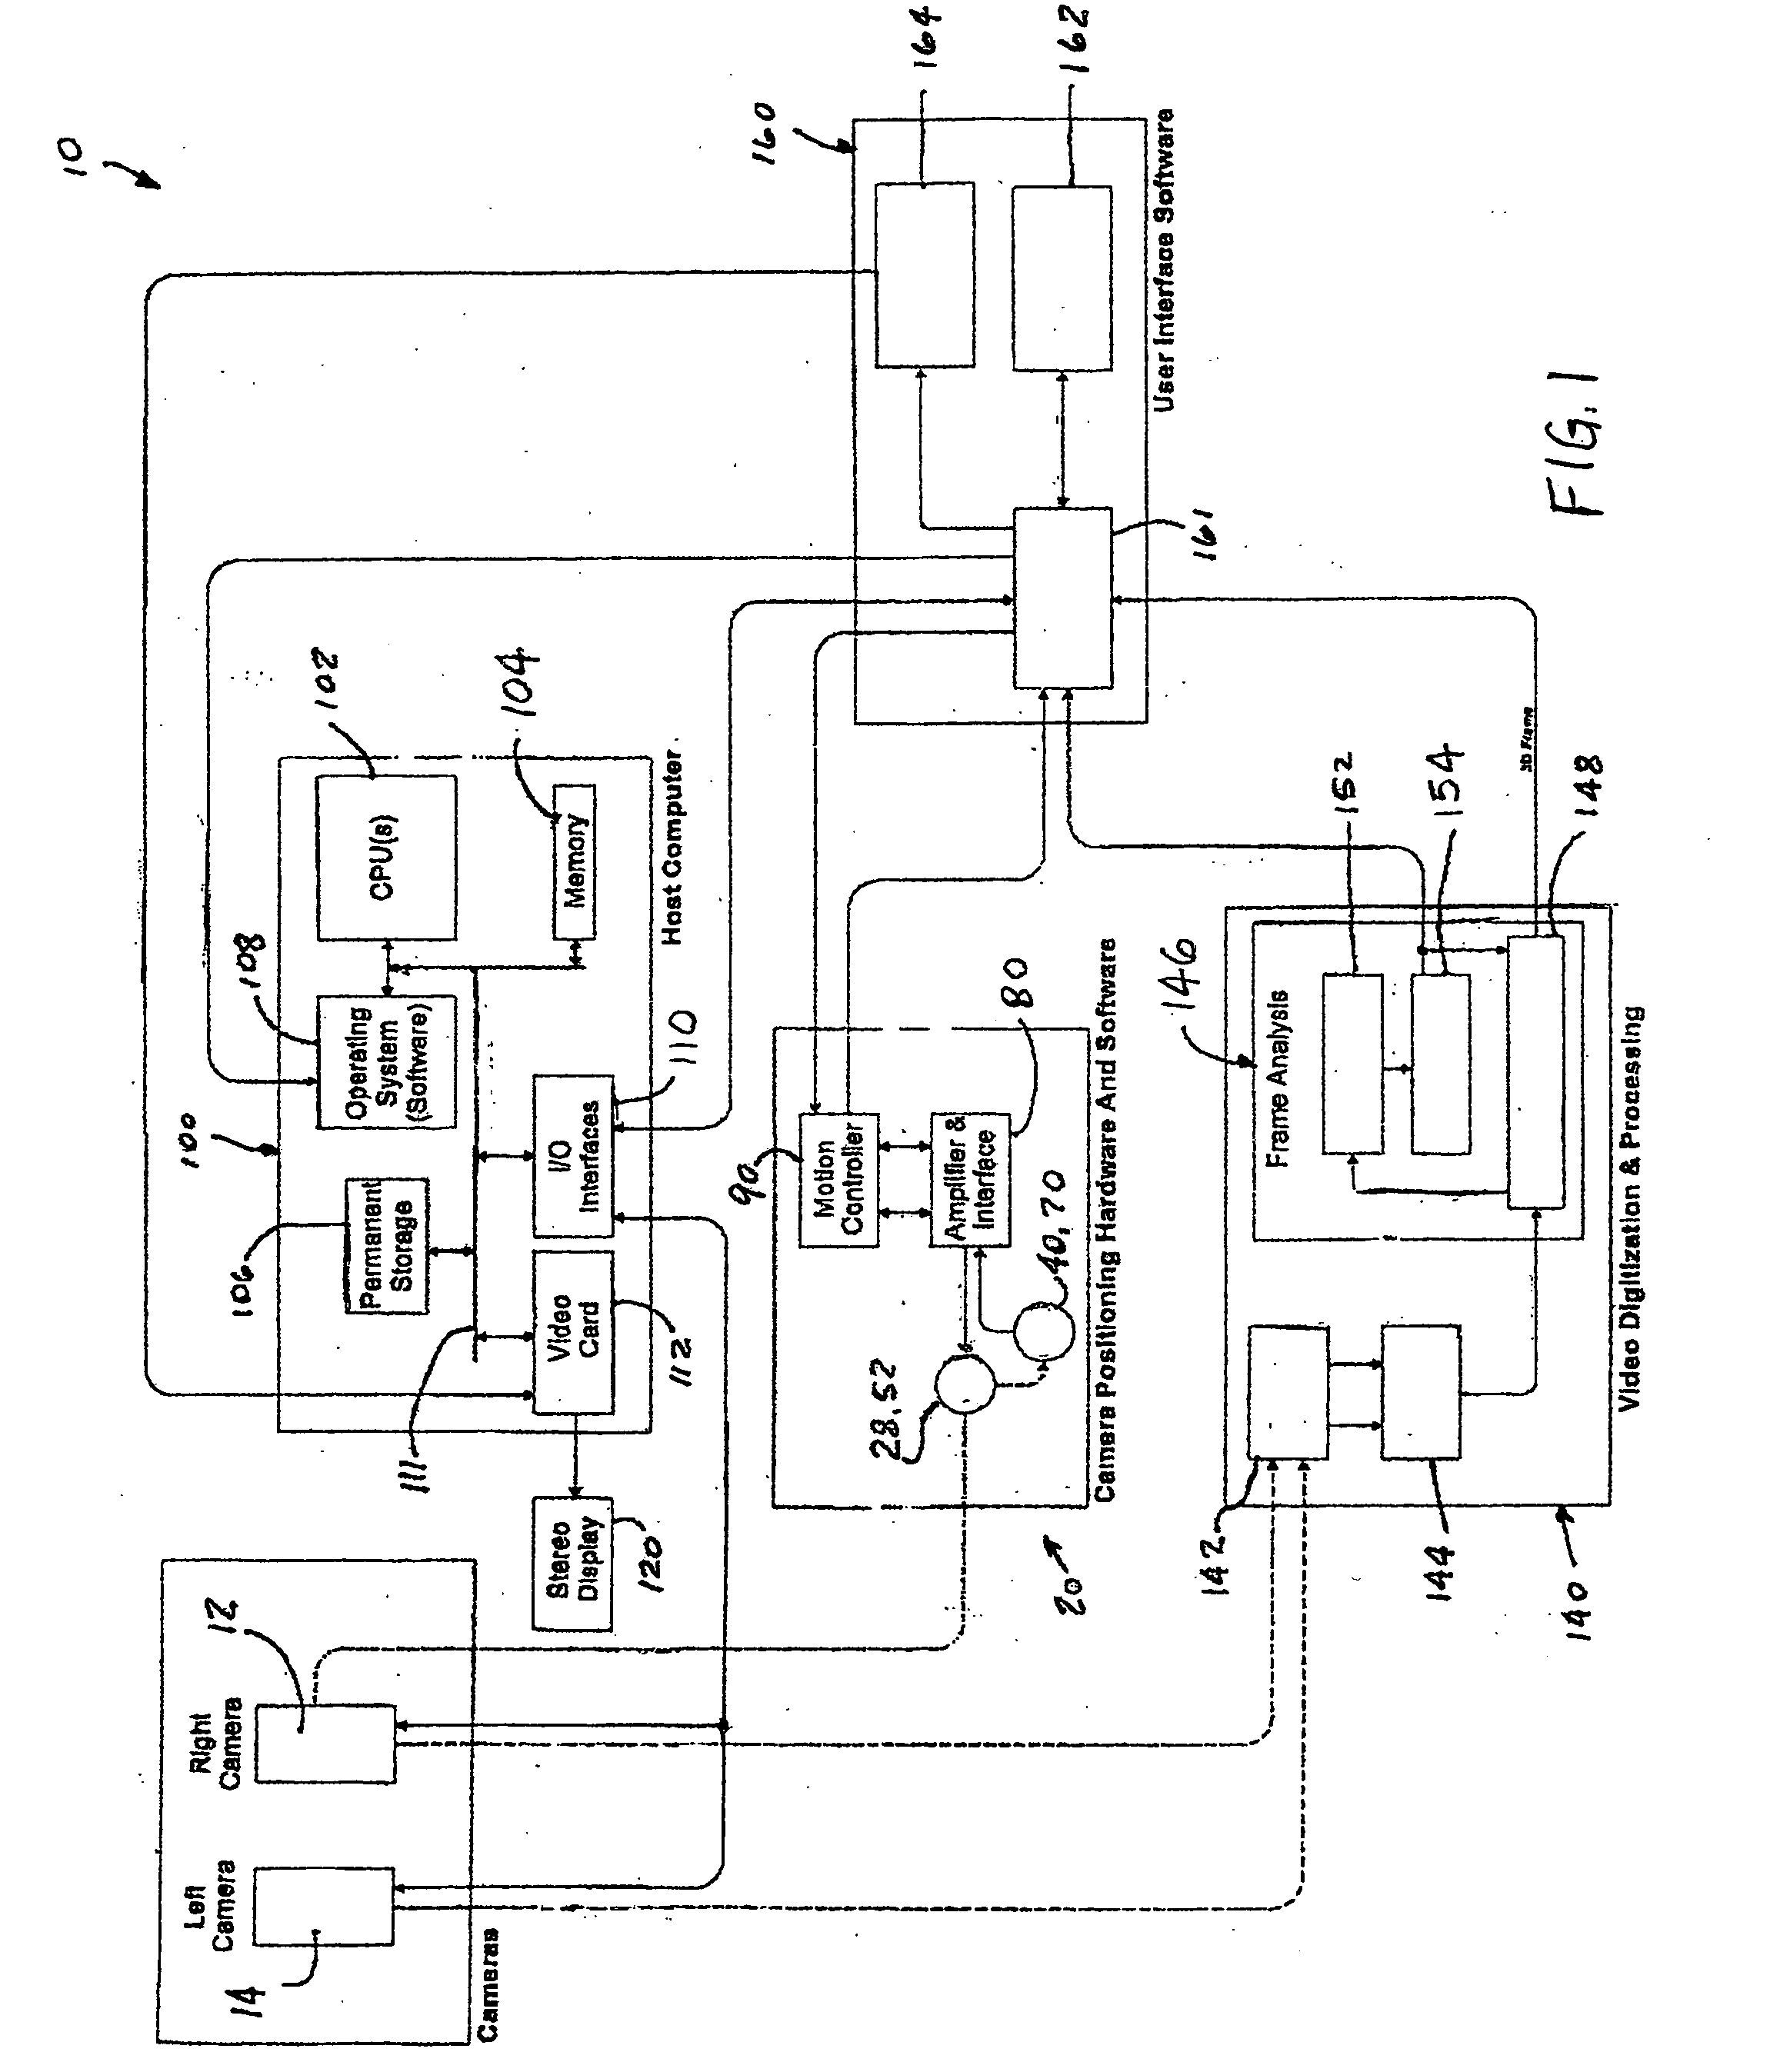 Apparatus, system and method for generating stereoscopic images and correcting for vertical parallax